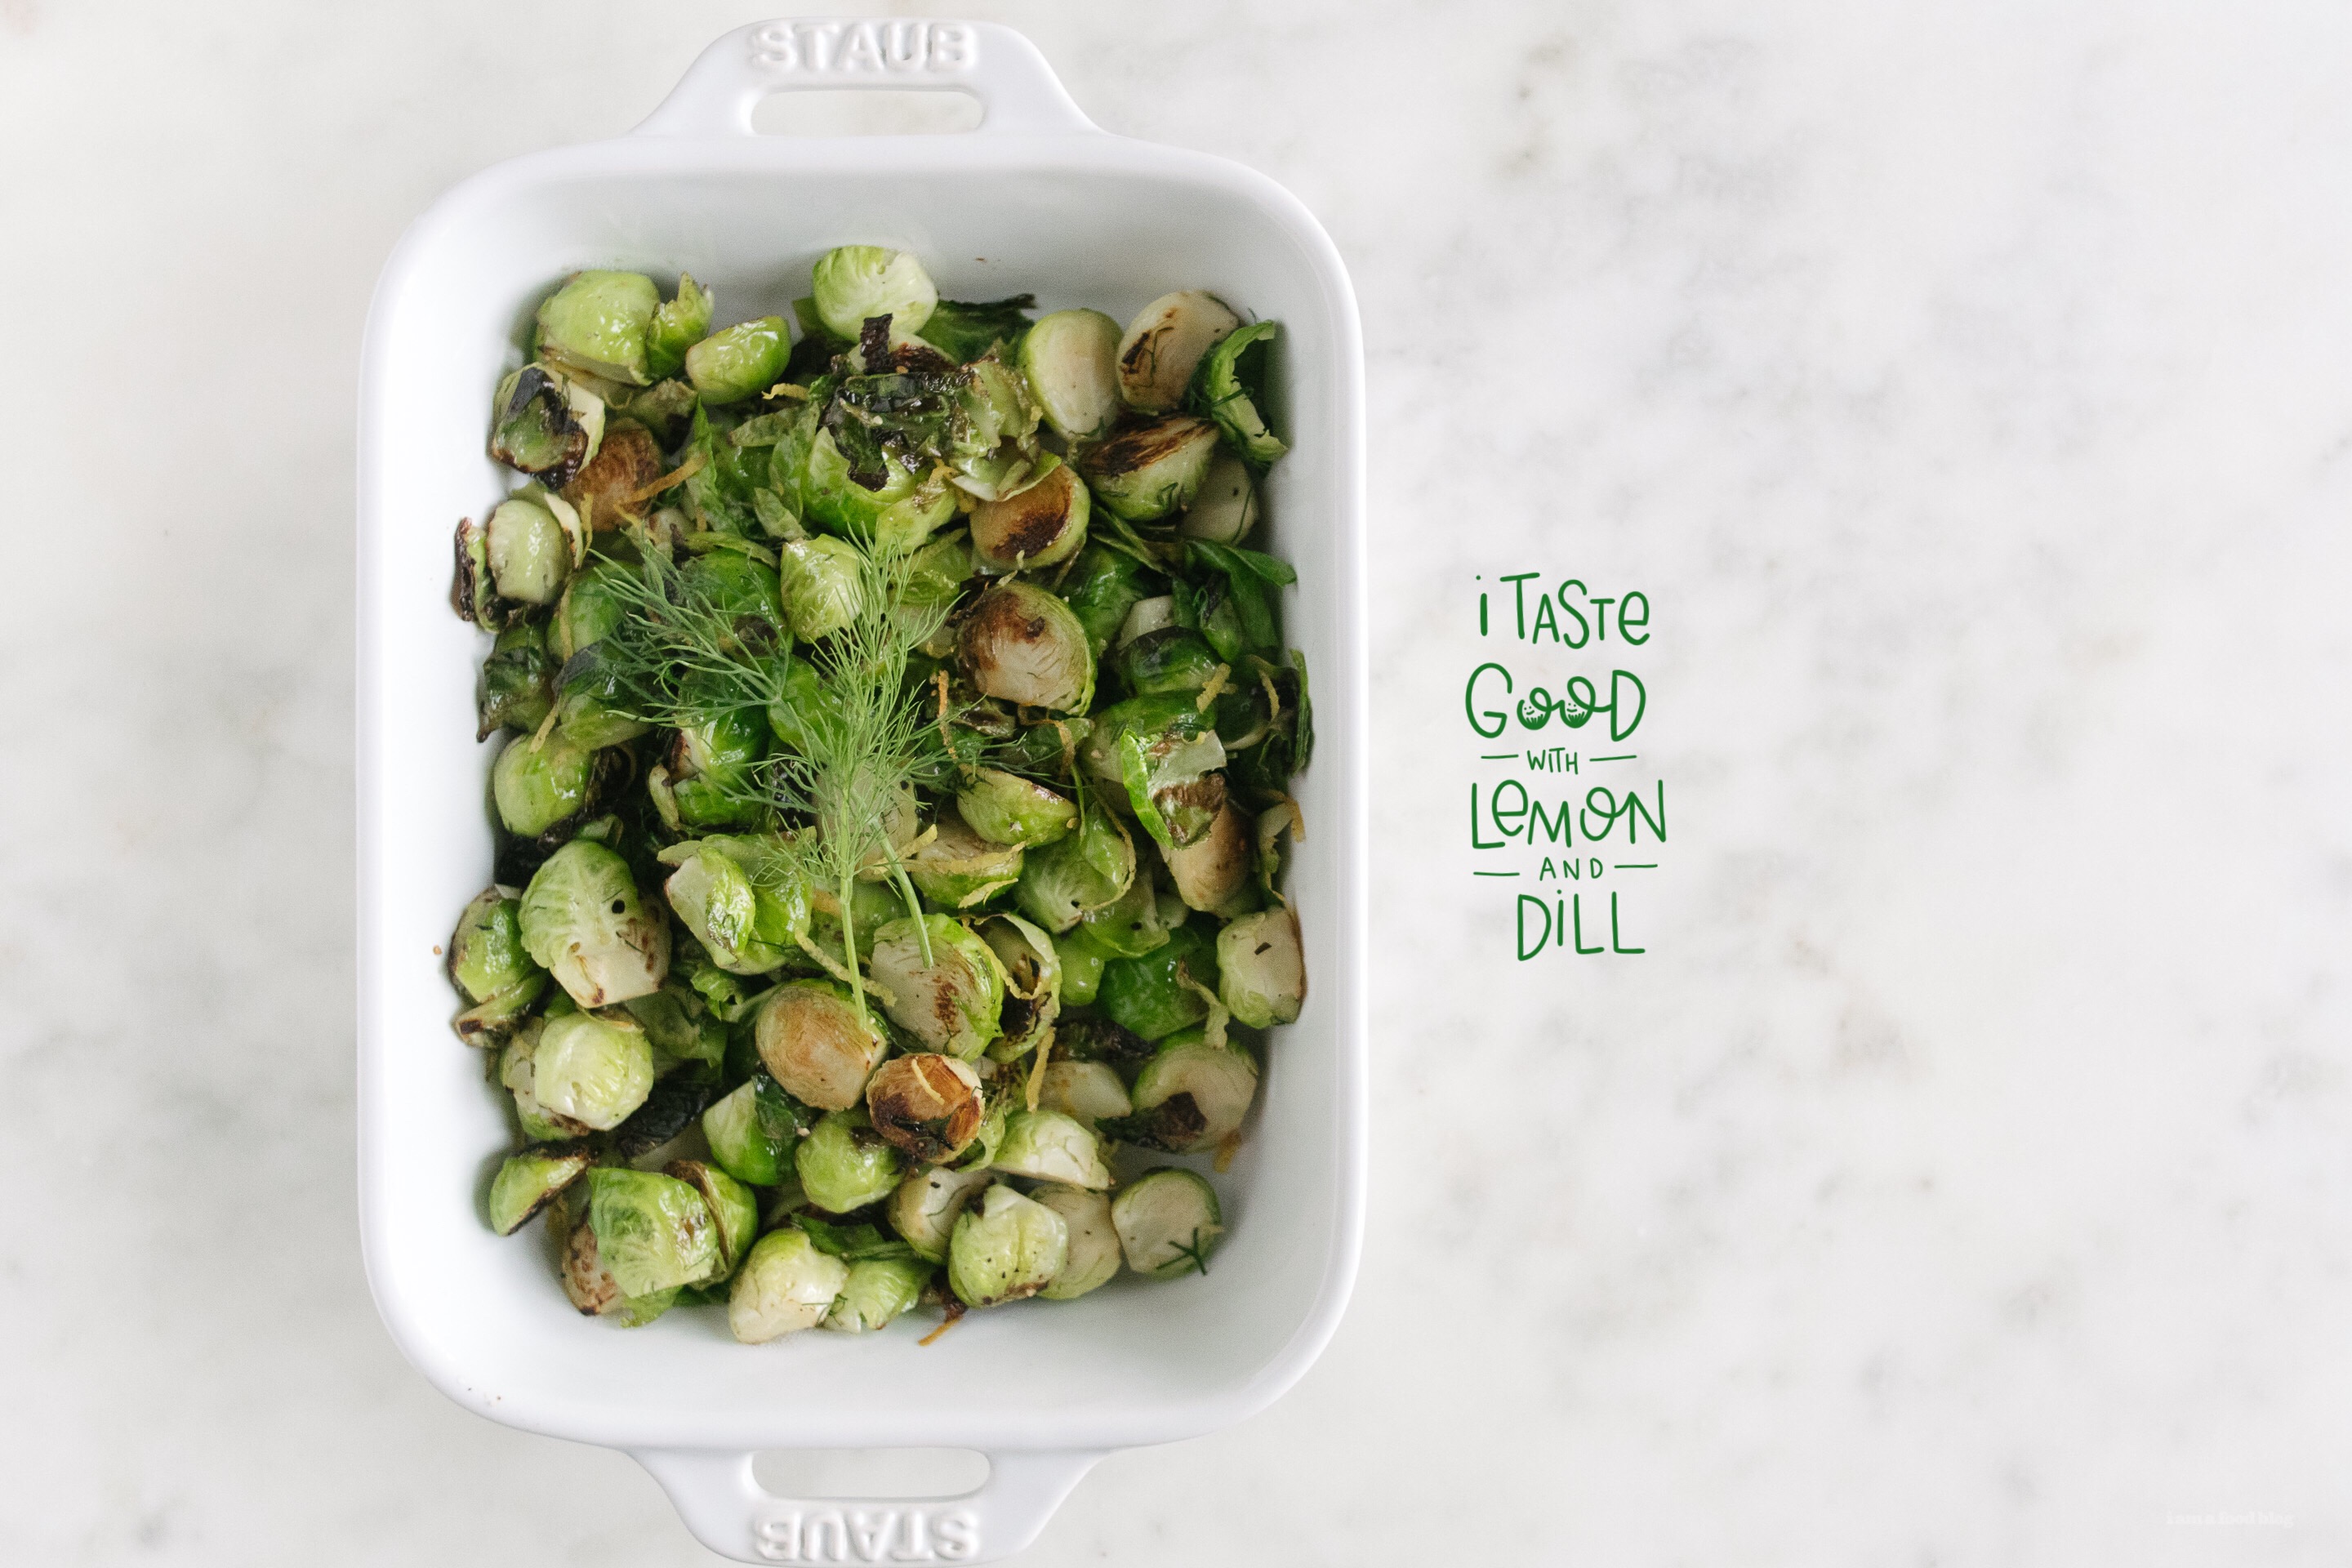 lemon dill pan roasted brussel sprouts - www.iamafoodblog.com